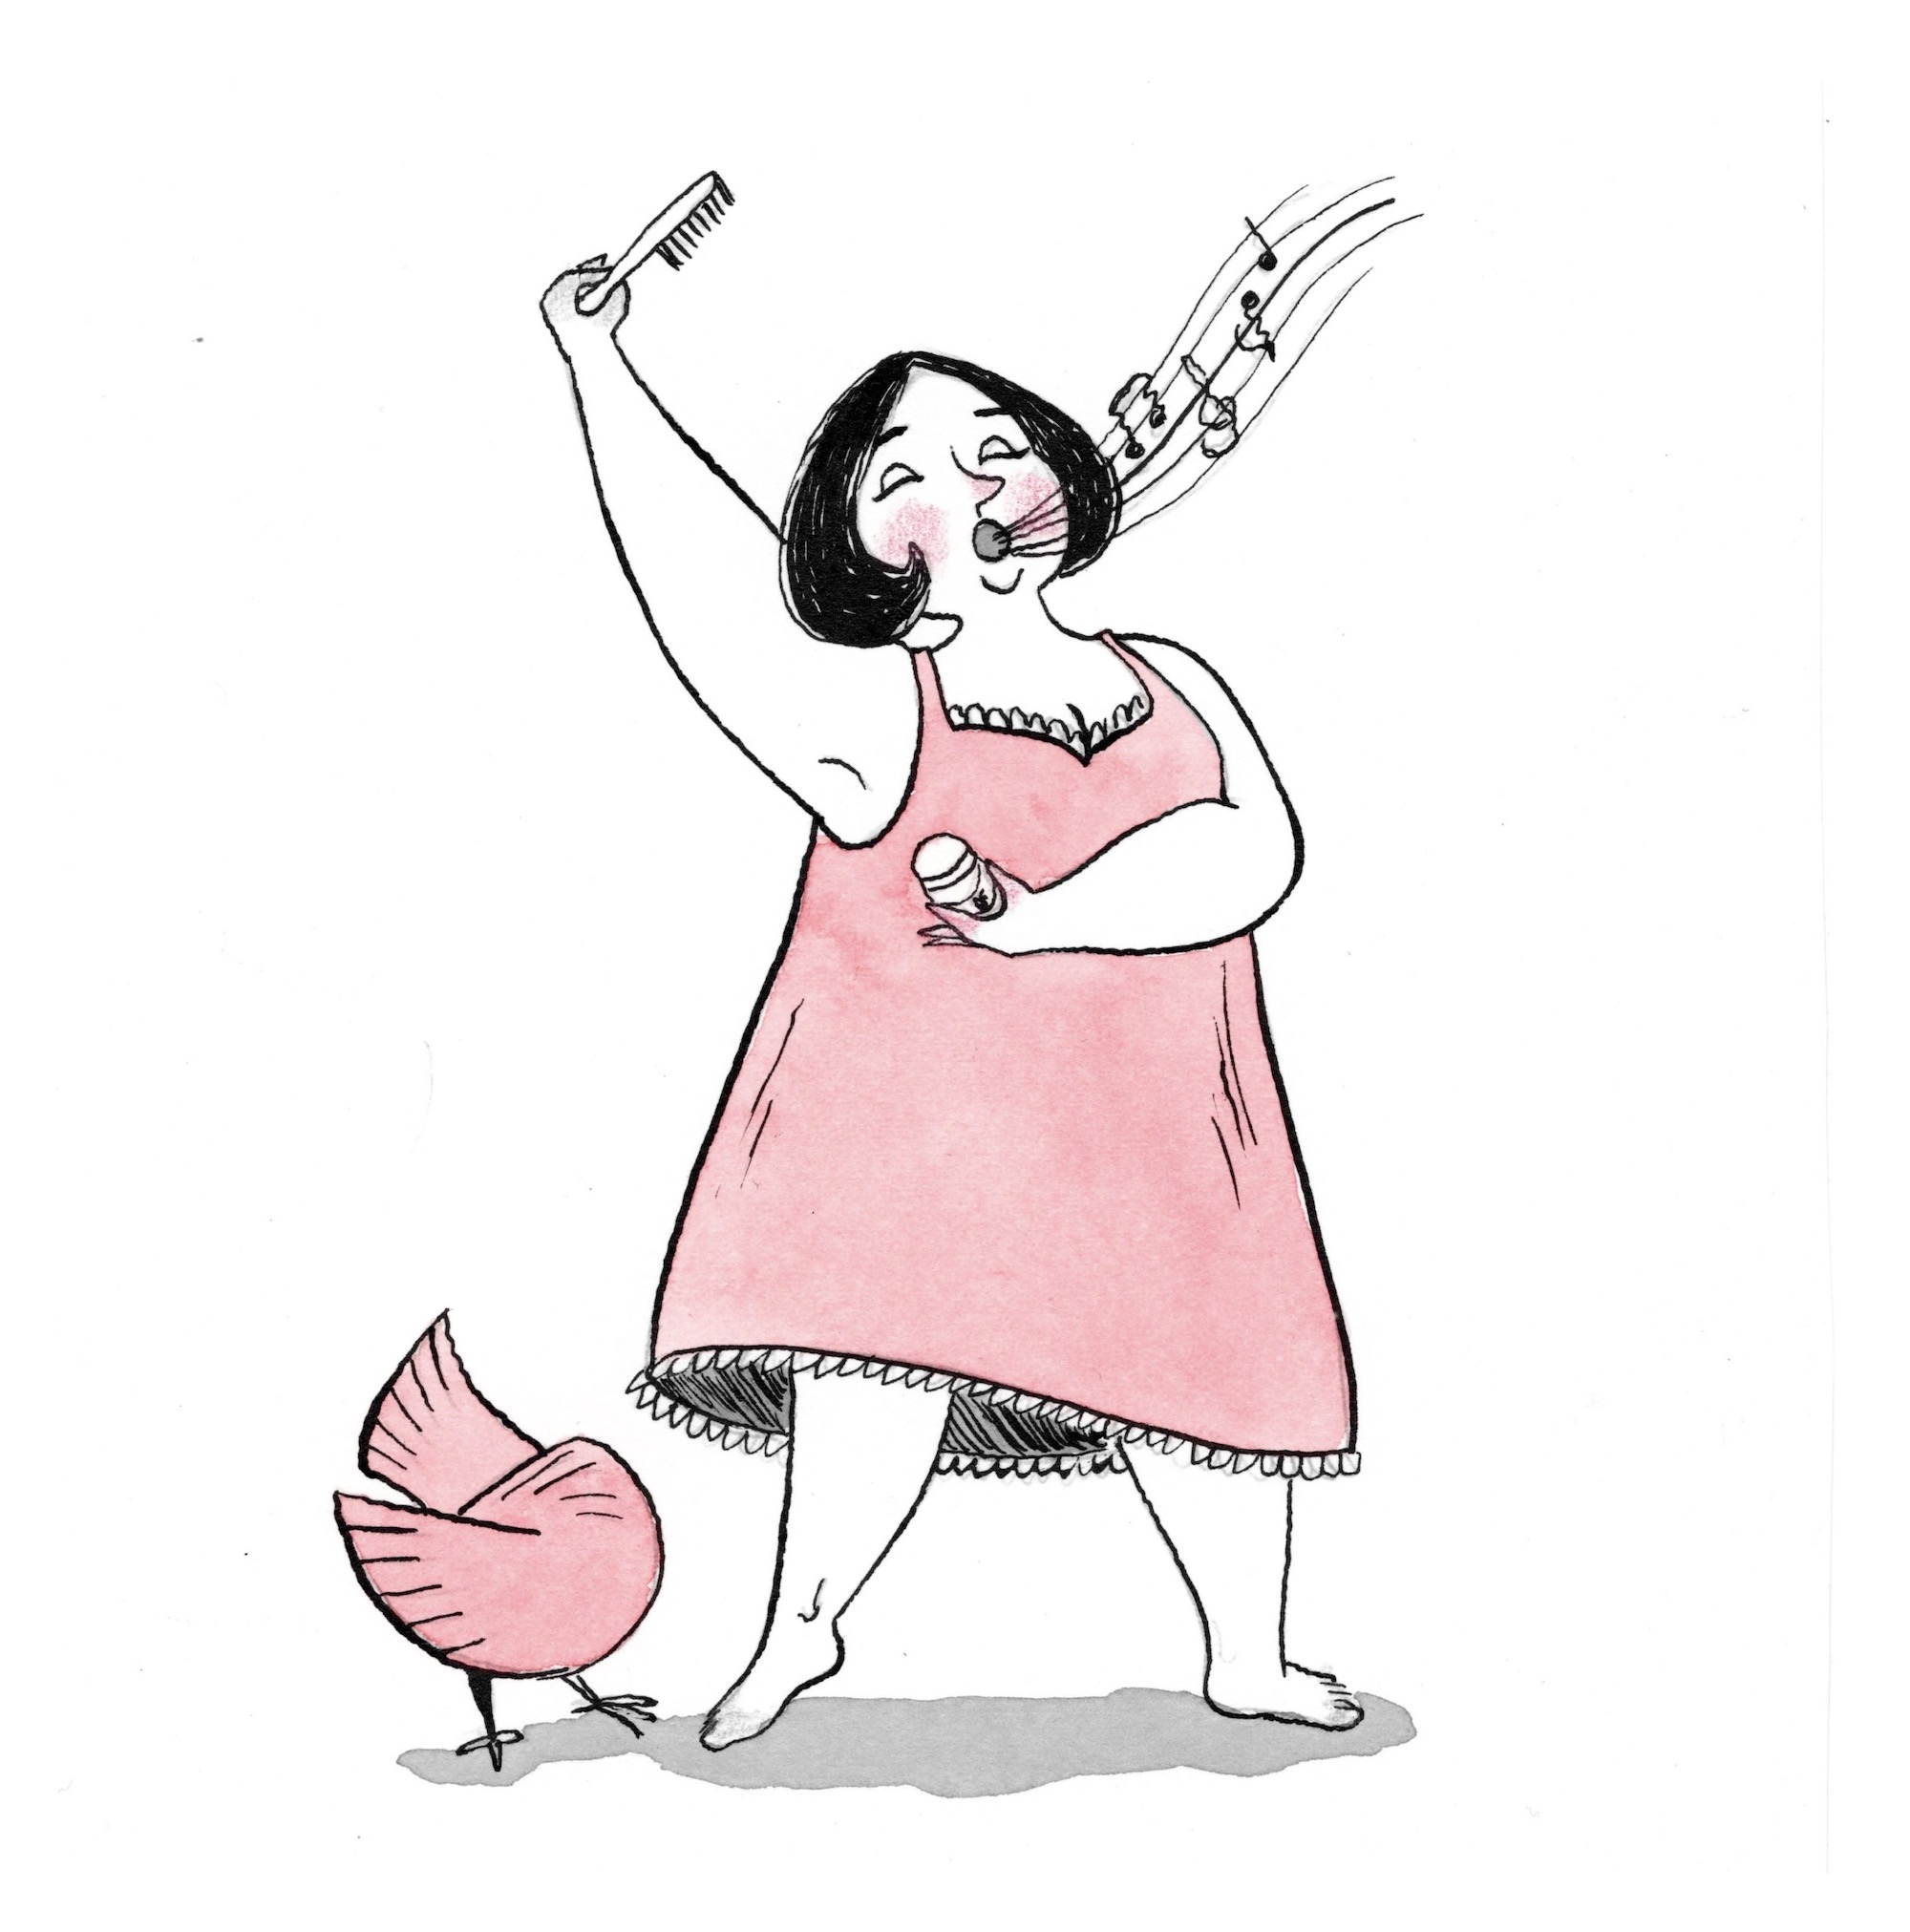 Black and white and pink illustration of a woman singing, brushing her hair, and putting on deoderant. At her feet is a preening chicken.